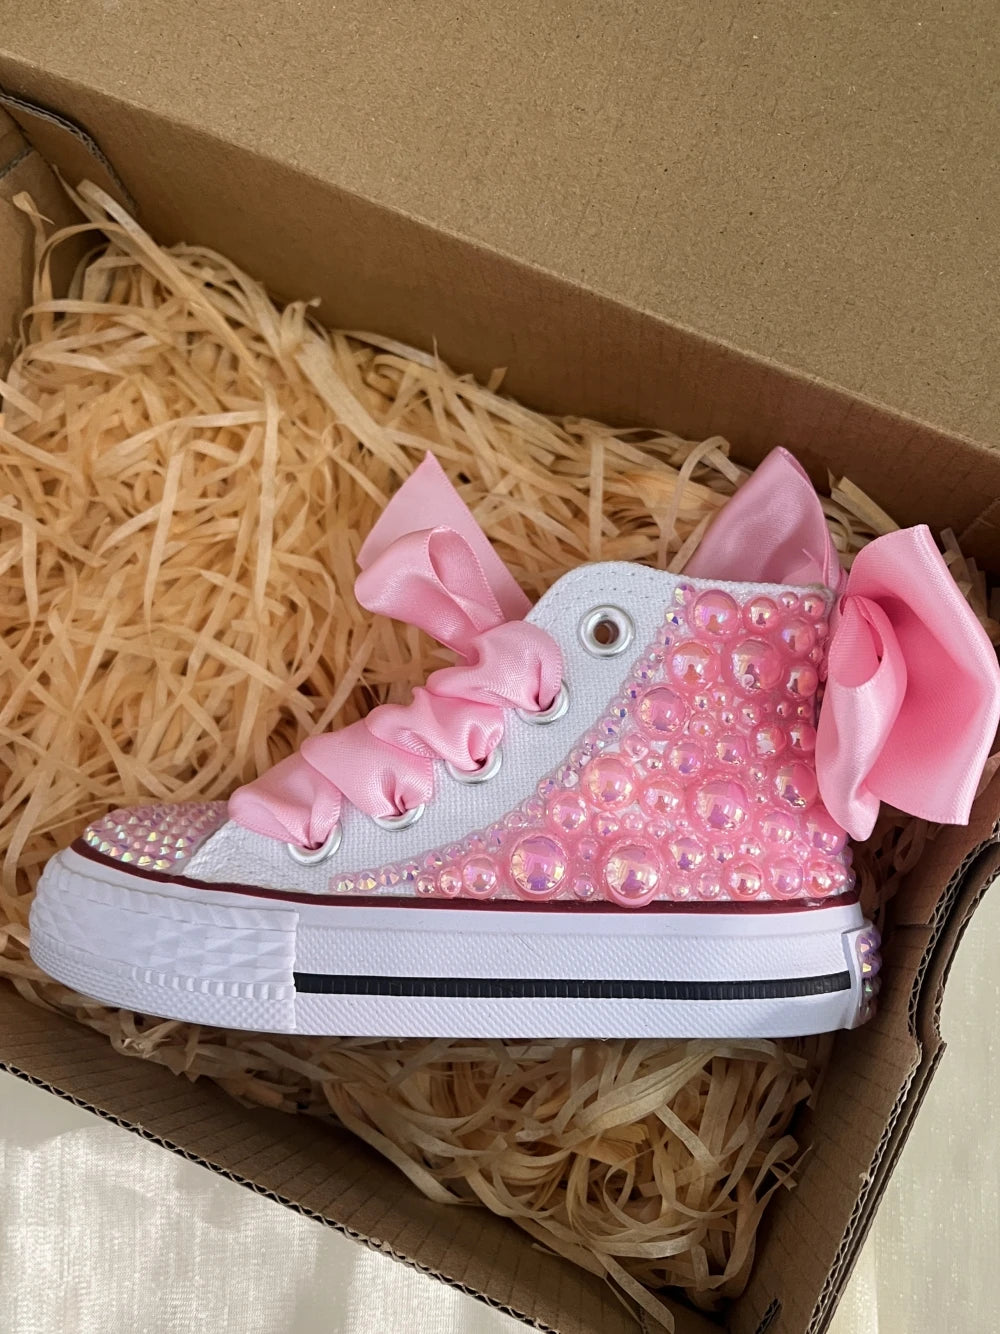 Dolly Bling Baseball Boots Baby Pink Bow Canvas